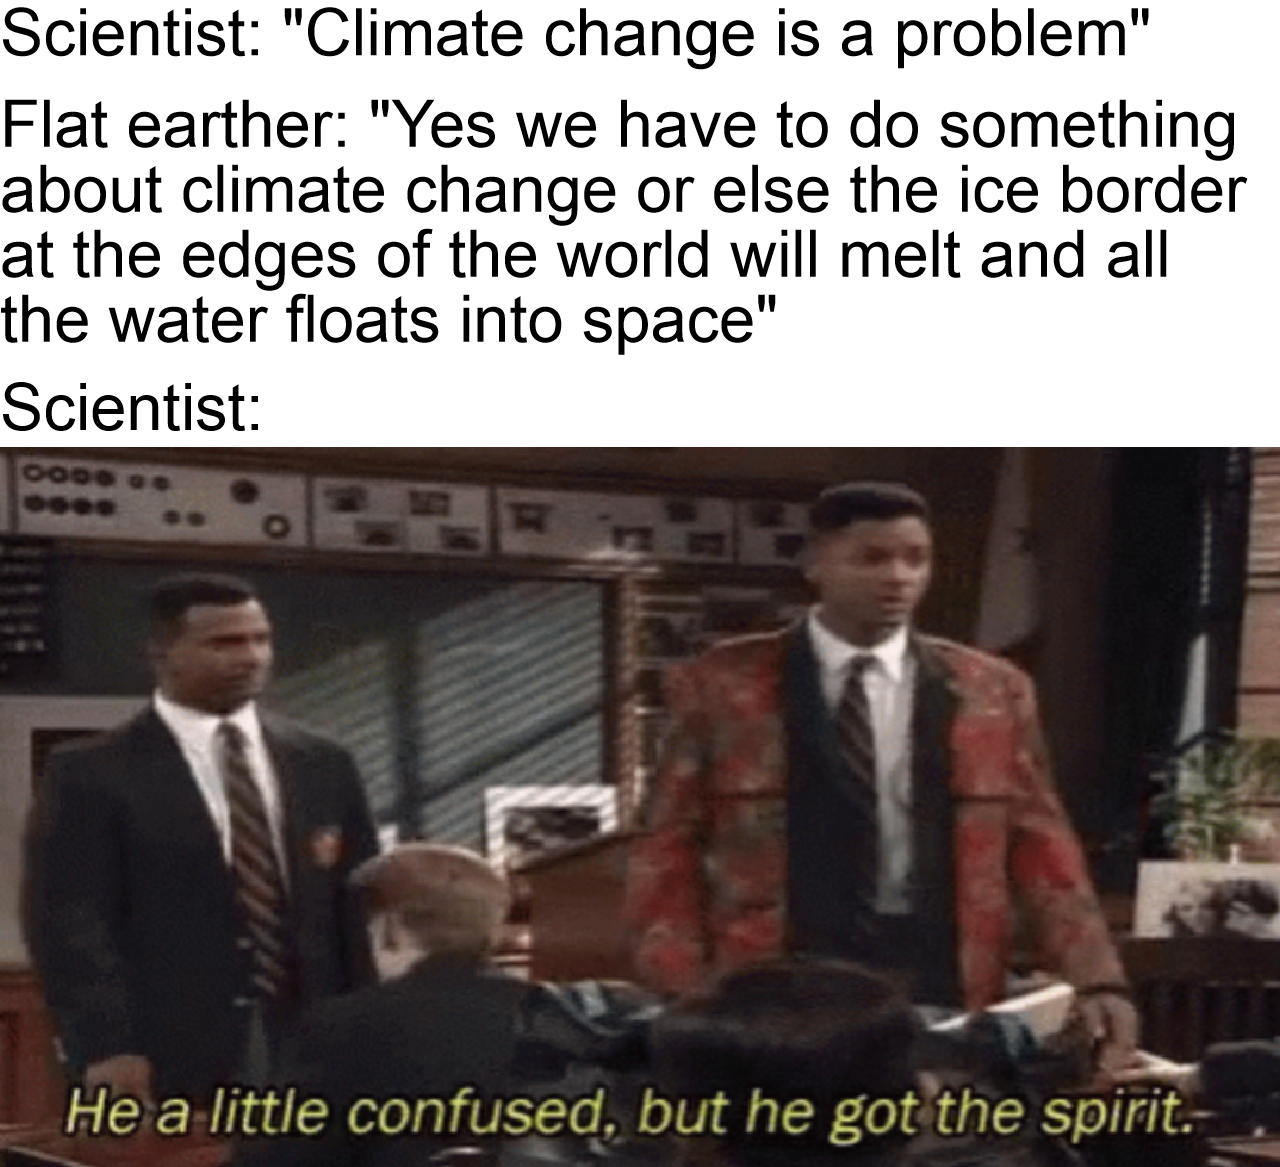 funny memes - dank memes - he a little confused but he got - Scientist "Climate change is a problem" Flat earther "Yes we have to do something about climate change or else the ice border at the edges of the world will melt and all the water floats into sp